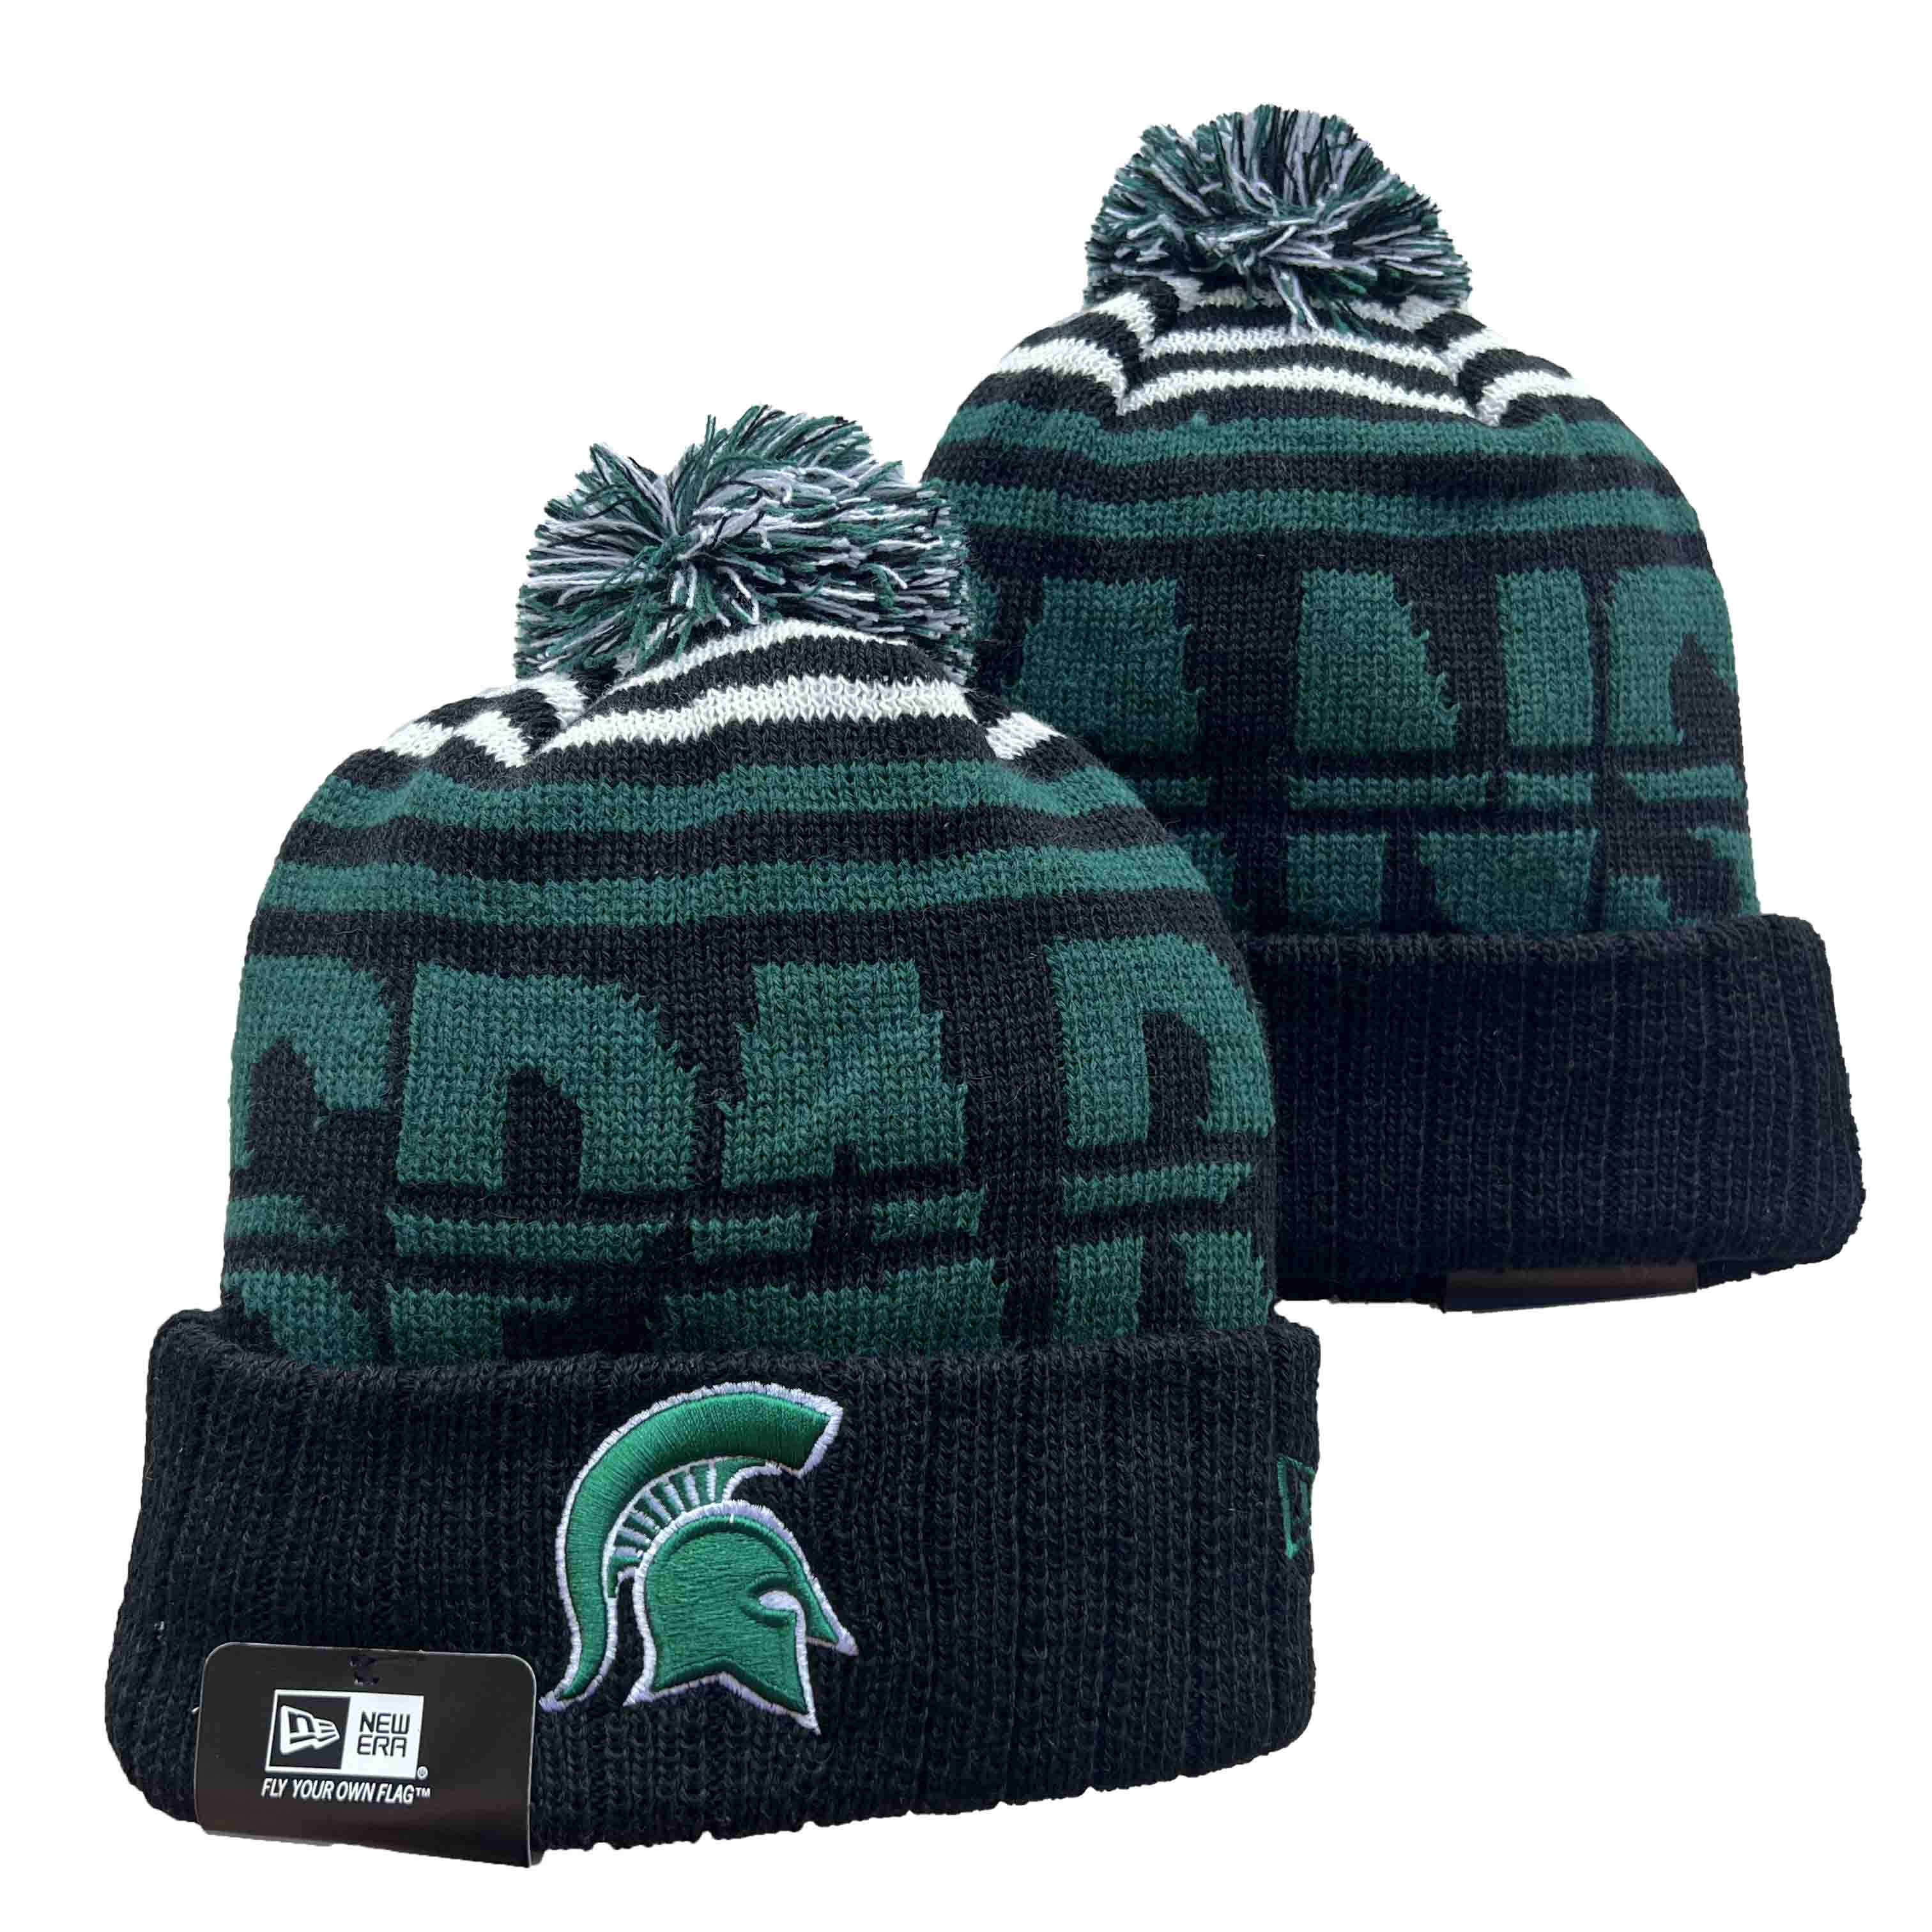 NCAA Michigan State Spartans Beanies Knit Hats-YD426